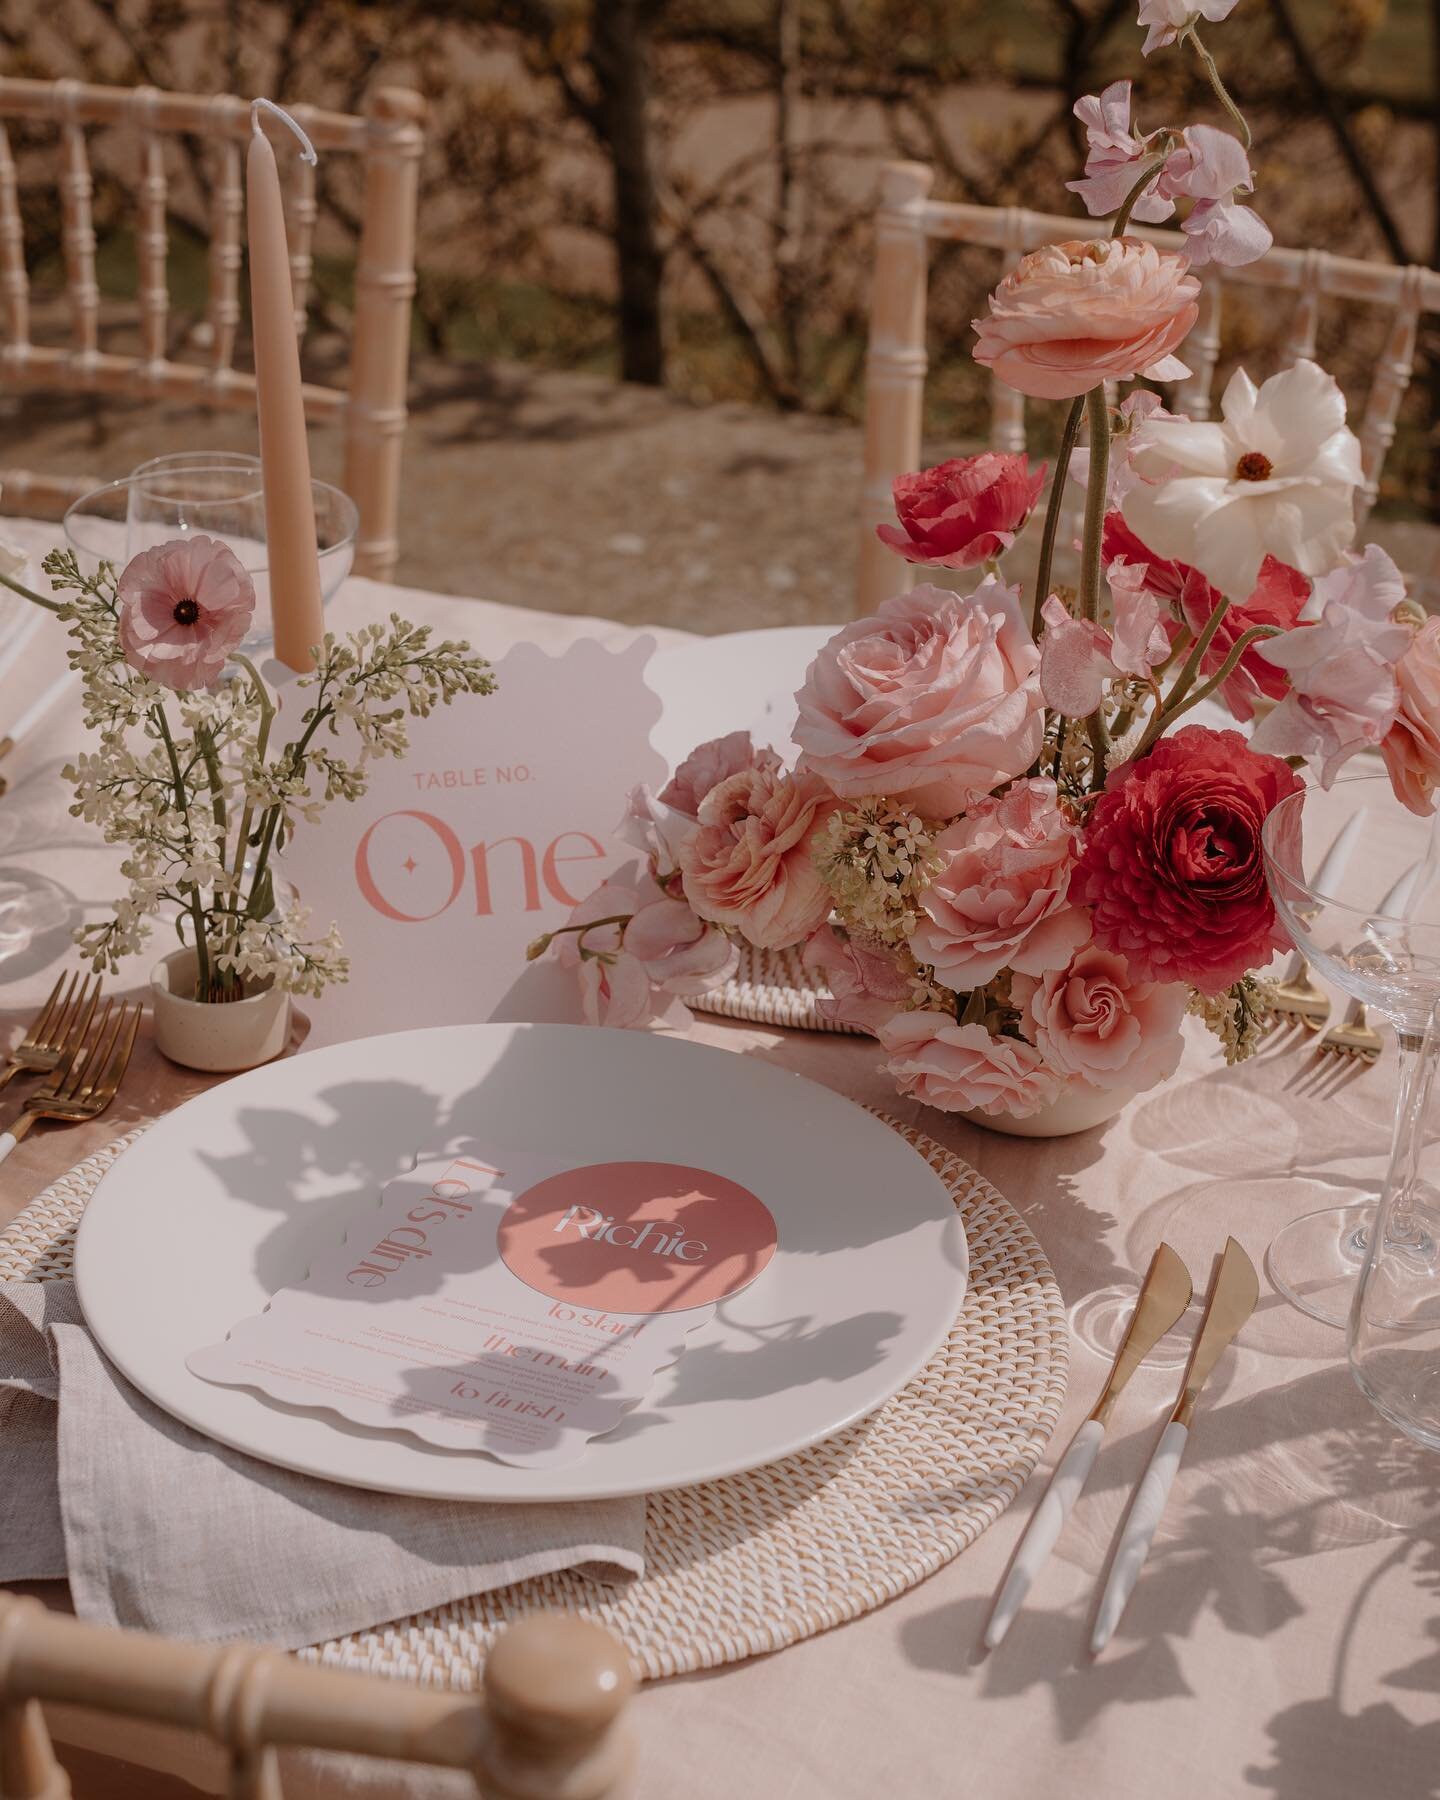 This weather has me dreaming of beautiful outdoor weddings, just like this pretty pink setup from a couple of weeks ago 🤍

Shot with a wonderful team 💕
Planner/Stylist: @boelleevents
Florals: @bybunchstudio
Photographer: @helenrosephoto
Venue: @osm